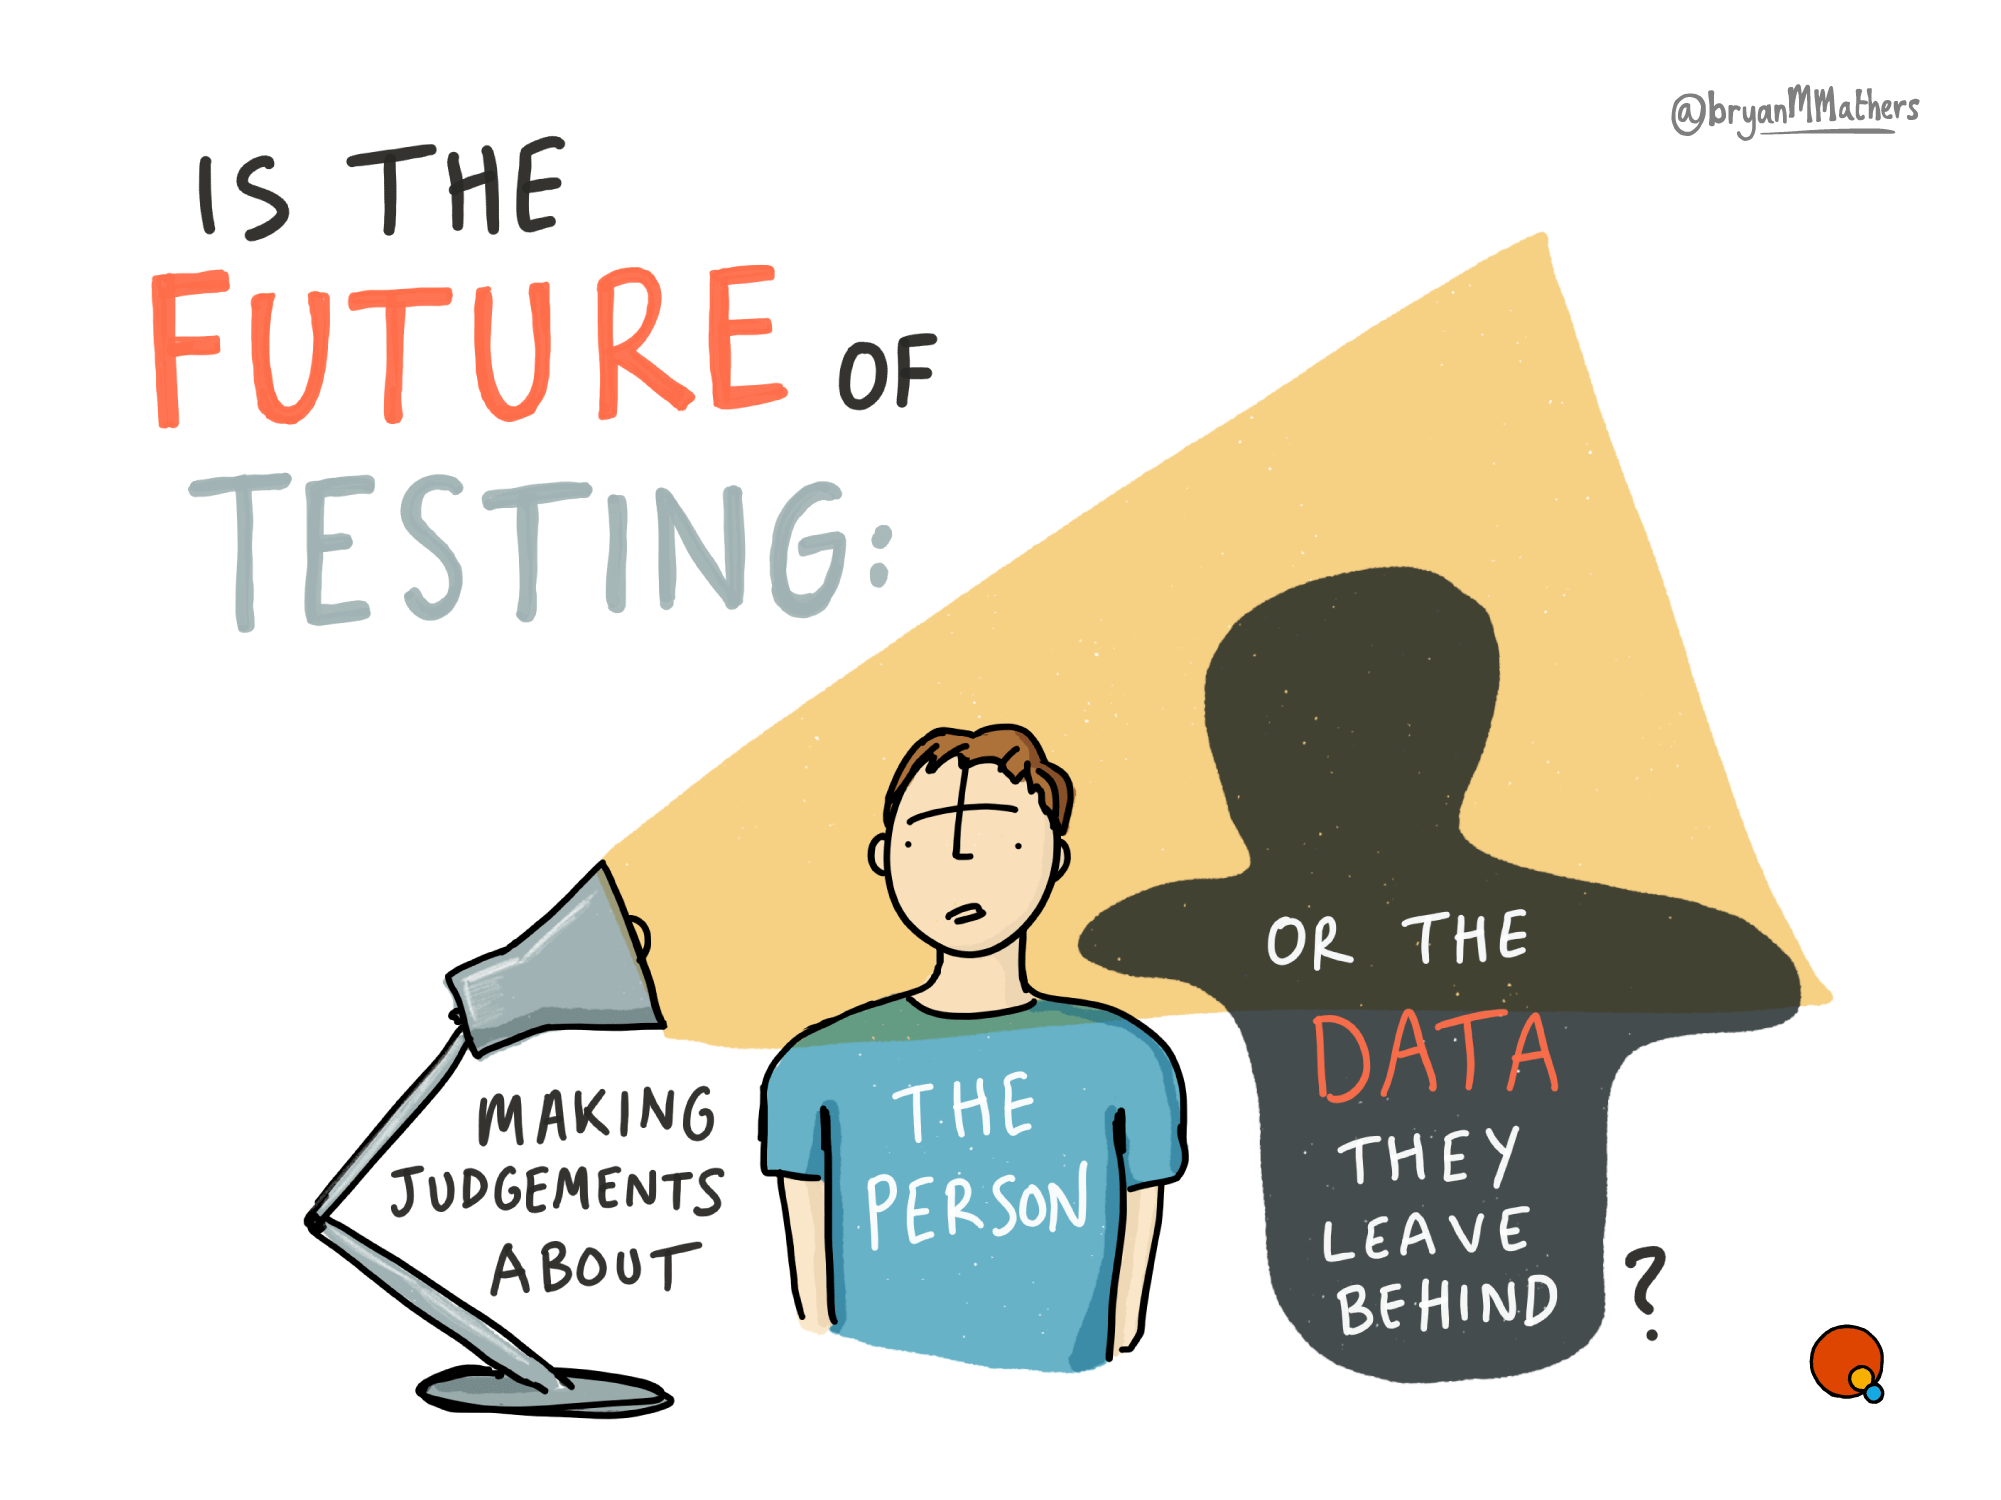 The future of testing